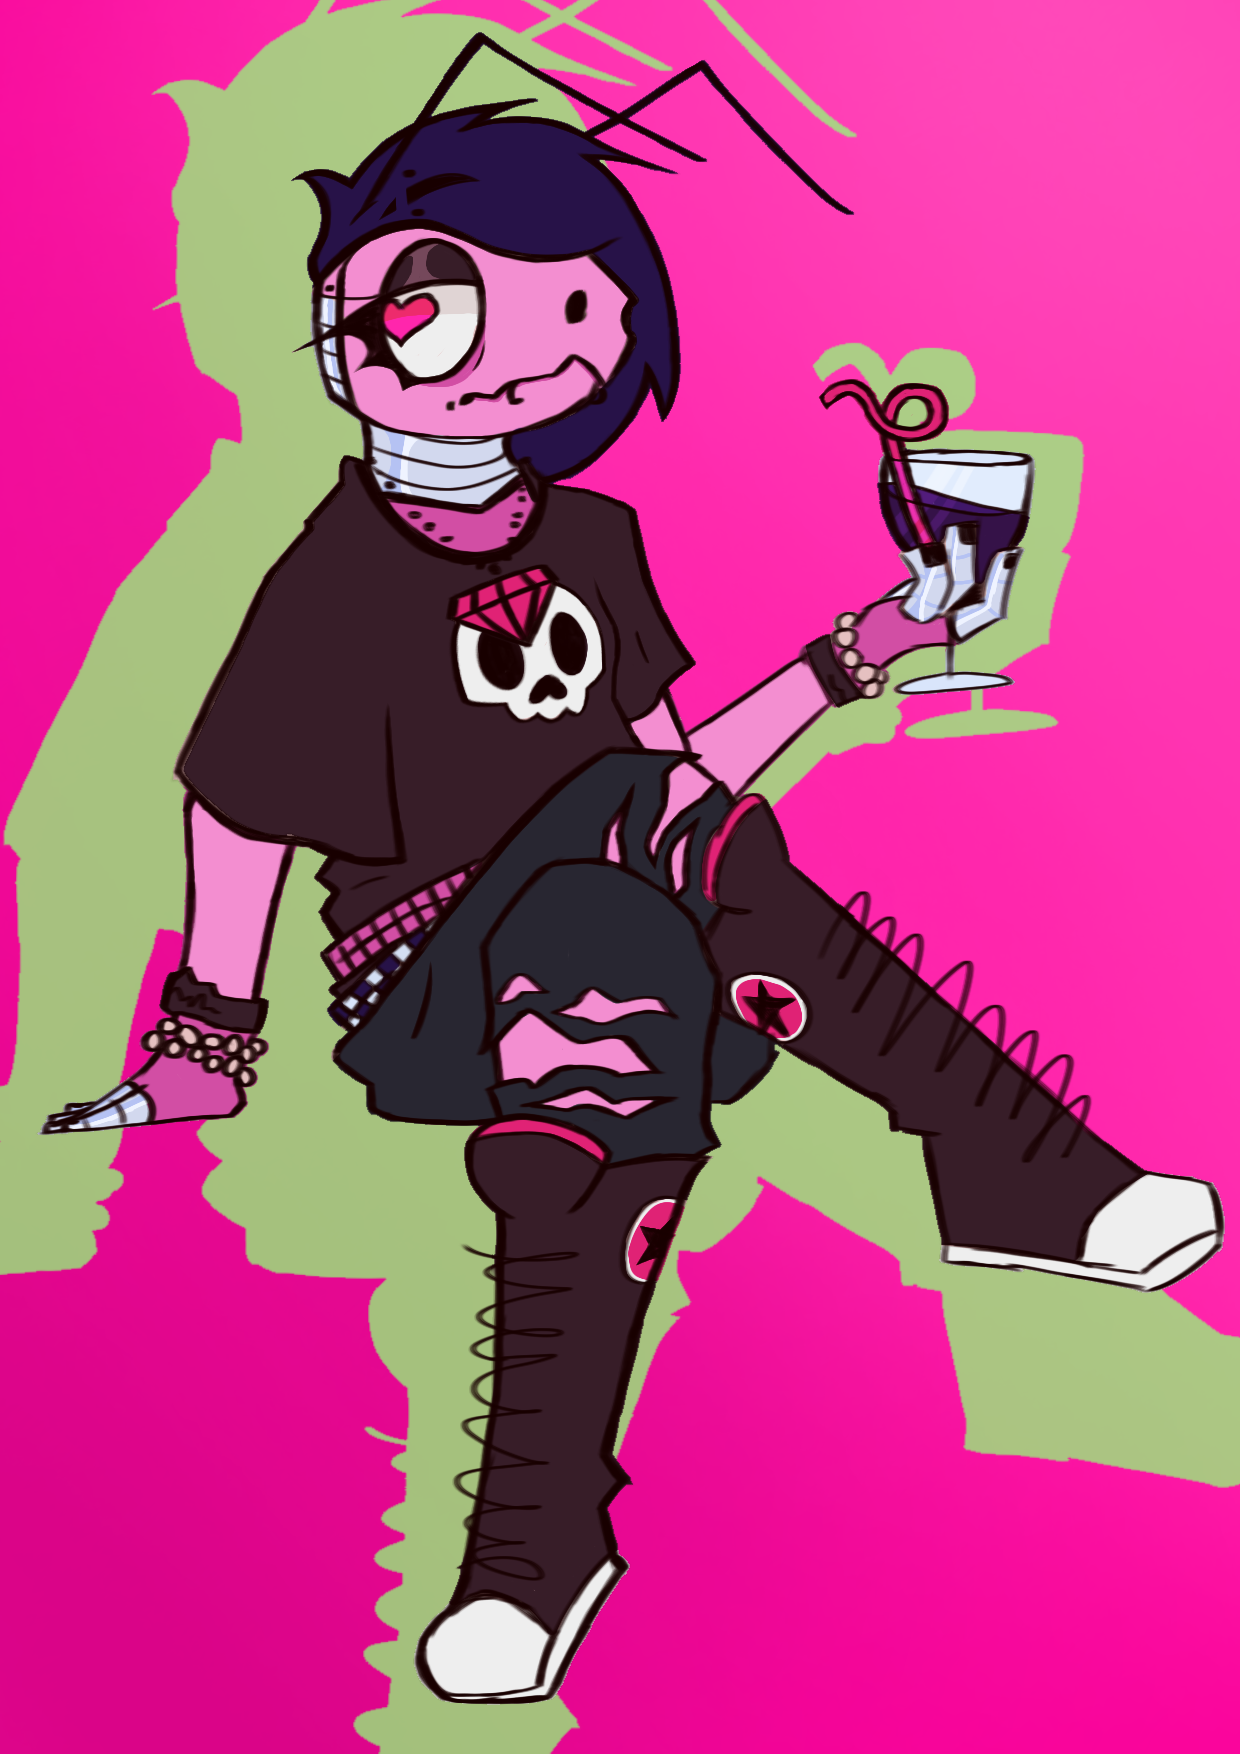 A full-body drawing of a buglike furry character sitting in a pink void with its legs crossed. In its left hand, it holds a wine glass with a pink silly straw. This character is robotic, and loosely based off of fireflies or lightning bugs, although it lacks any method of emitting light. It has black scene hair and heart-shaped pupils. Its outfit is also traditionally 'scene,' featuring a pink diamond symbol necklace, a skull t-shirt, and ripped jeans, along with a pair of knee-high Converse shoes. The character is wearing multiple bead bracelets (uncolored, because I, the artist and the person writing this text, forgot), and multiple silicone bracelets, colored black. A light green silhouette of the character is in the background, filling out any blank space left by where the character is not.